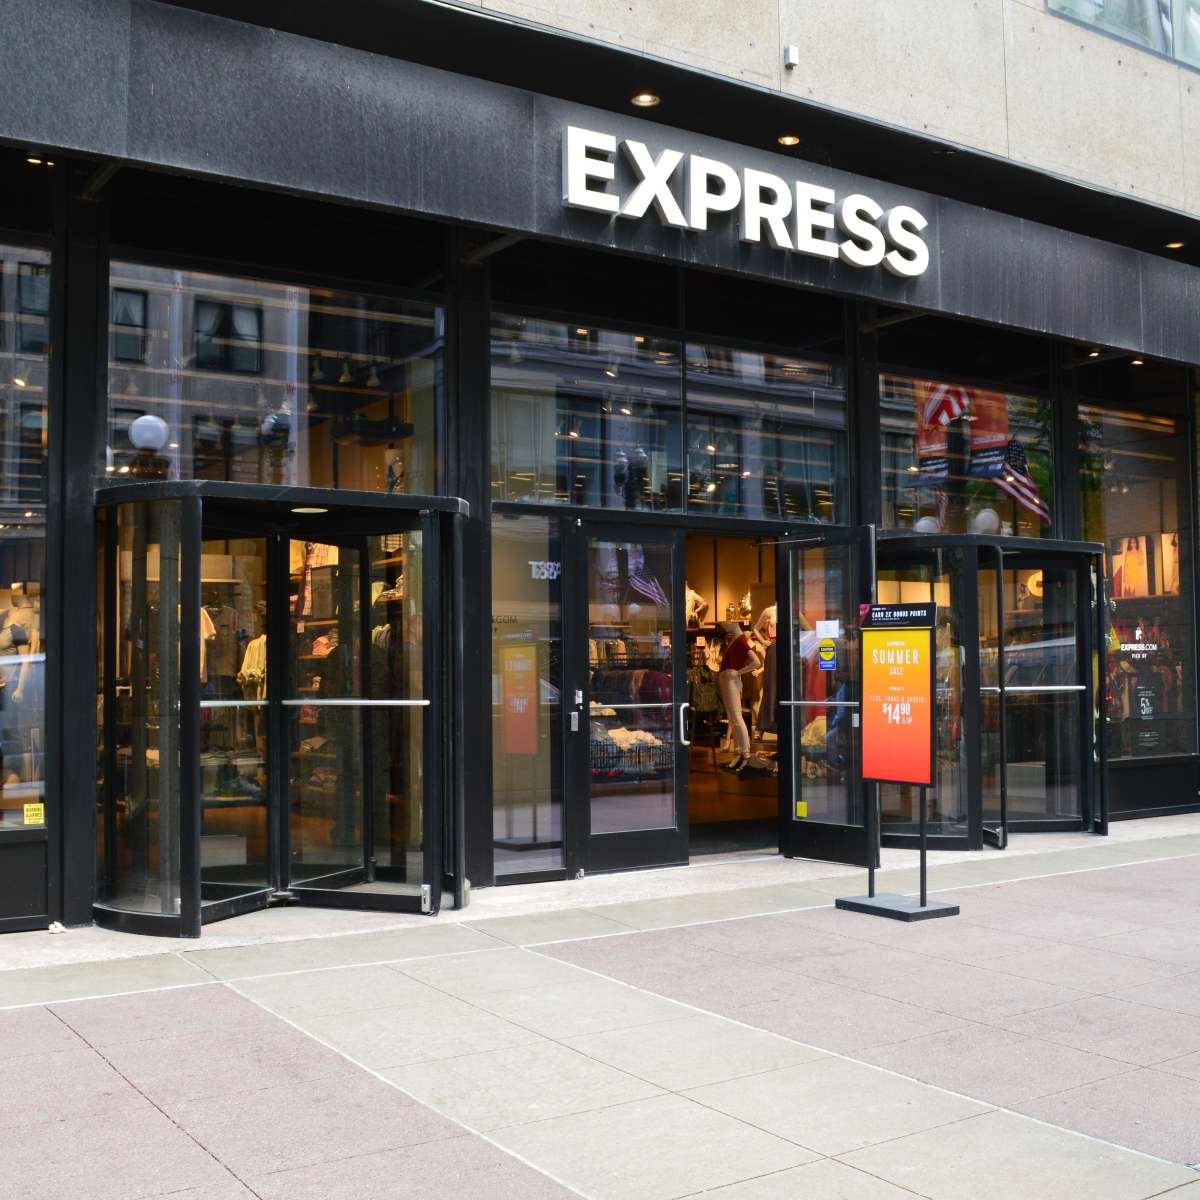 BANKRUPTCY ALERT 🚨

Longtime mall retailer Express has filed for CH.11 bankruptcy after failing to stay on trend and keep up with shifting consumer demand. Luckily, a group of investors led by brand management firm WHP Global is looking to save the company by acquiring it.